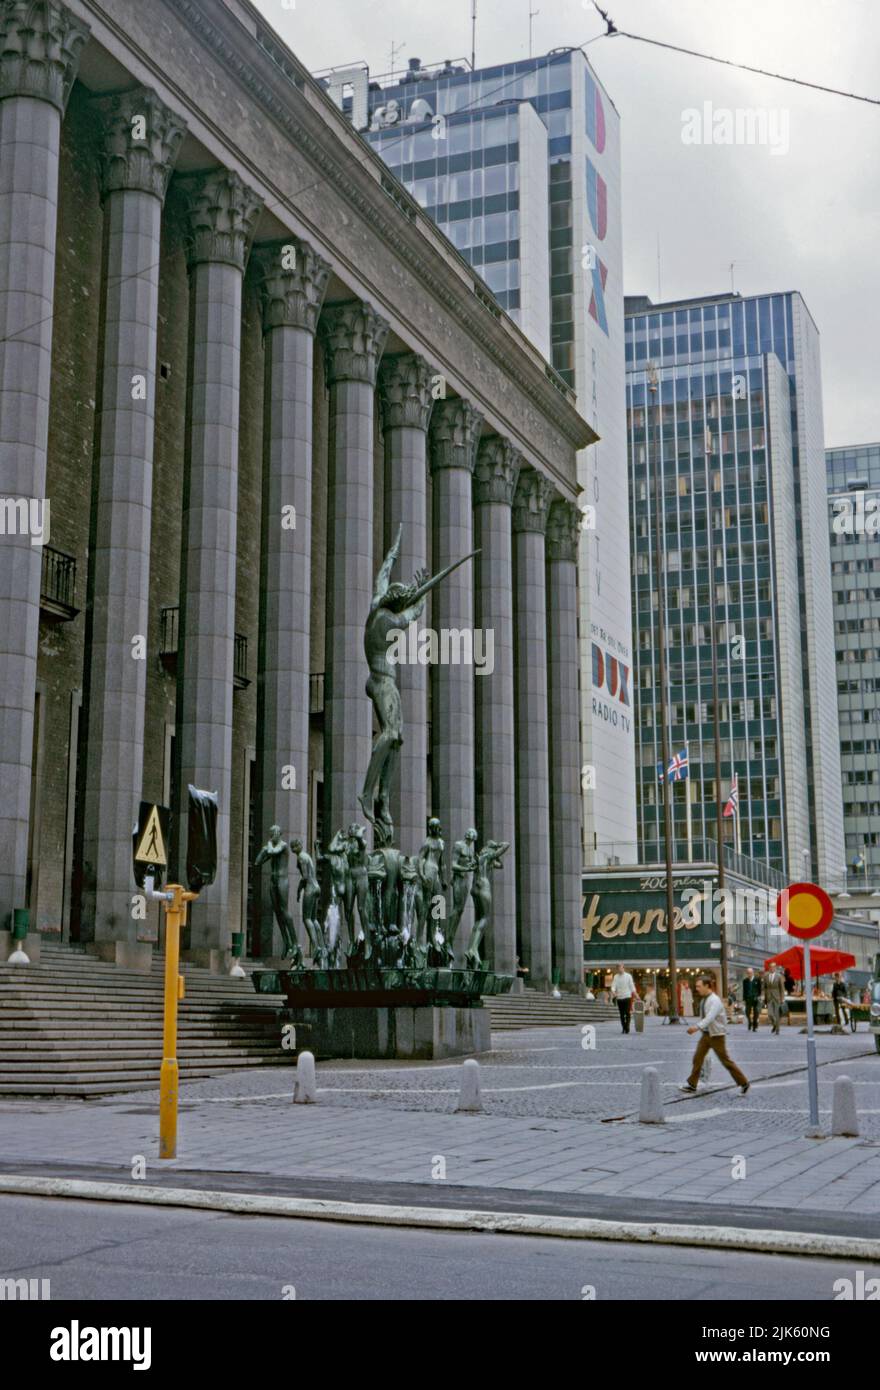 A view of the Konserthuset (Consert House) in the central Norrmalm district, Stockholm, Sweden in 1970. The sculpture is The Orpheus Group, by Carl Milles. In the background are the Hötorget buildings, five modernist high-rise office blocks. The nearest block carries a giant advertising logo for Dux TVs and radios. Norrmalm is at centre of Stockholm. This image is from an amateur 35mm colour transparency – a vintage 1970s photograph. Stock Photo